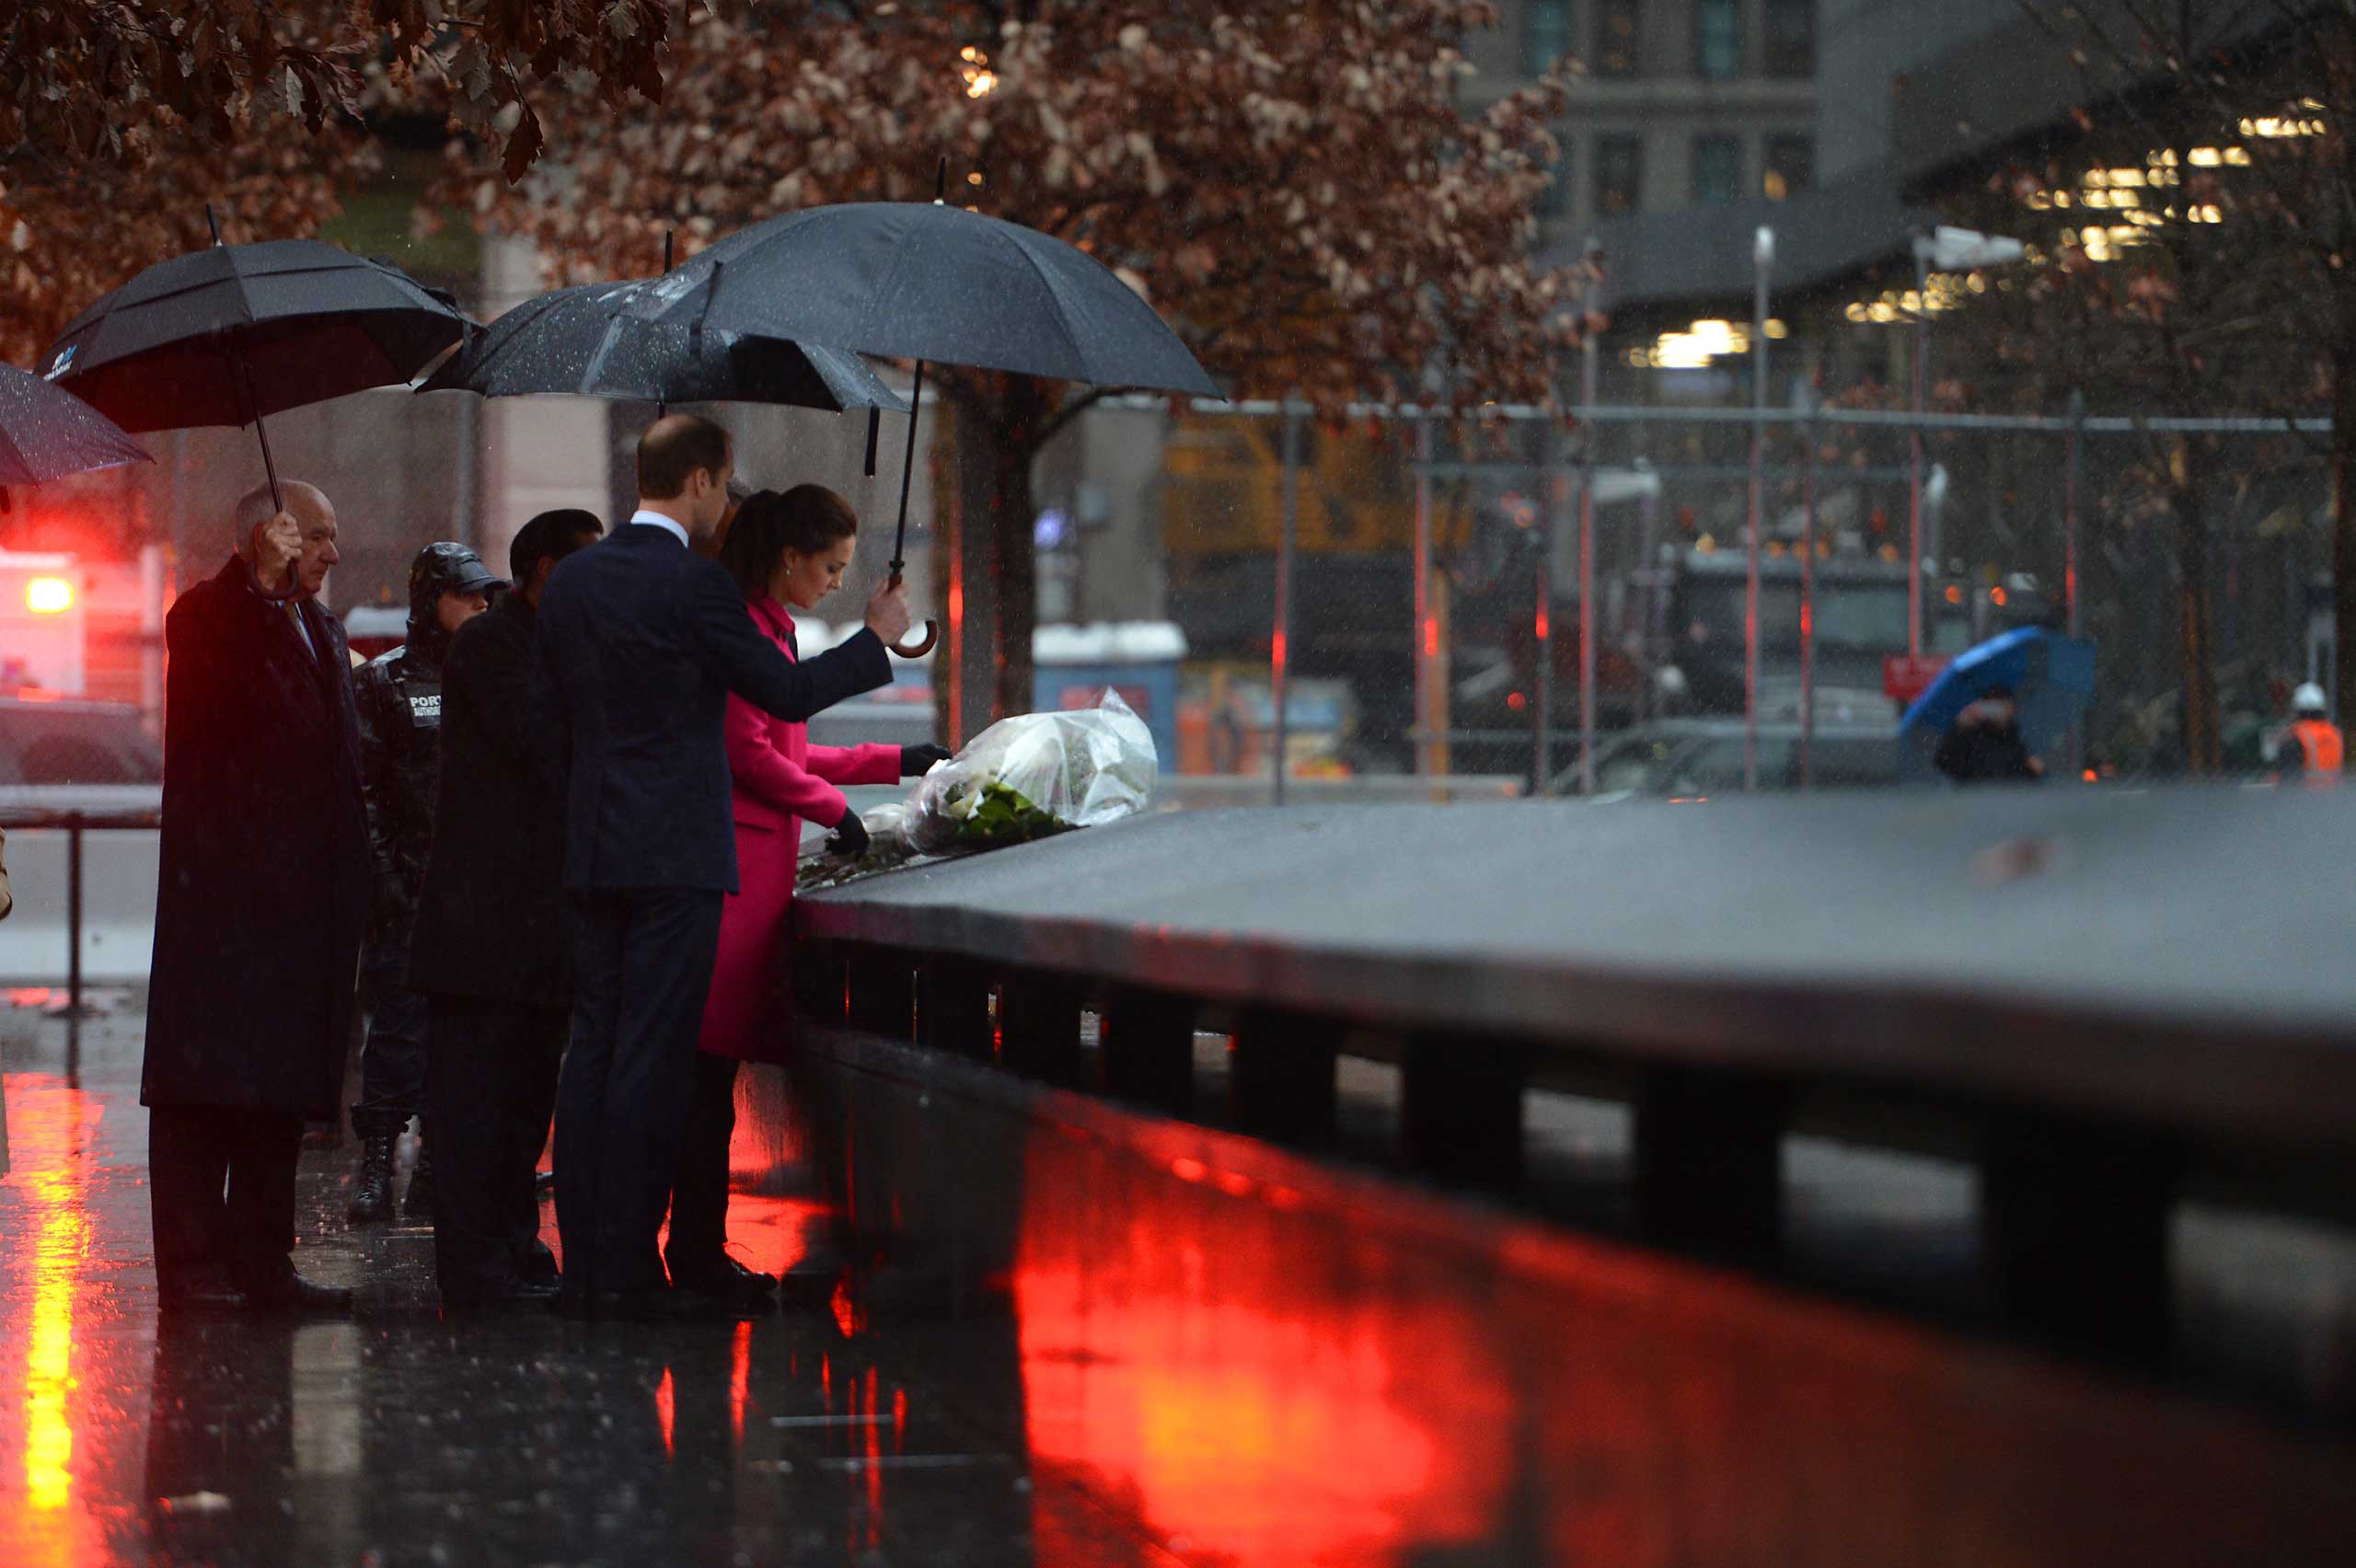 Dec. 09, 2014. The Duke and Duchess of Cambridge Prince William and Catherine lay flowers in memory of the victims of the 9/11 terrorist attacks during a visit to the National September 11 Memorial and Museum in New York City.  The royal couple, who is traveling without their son Prince George, is on a three-day U.S. east coast visit.